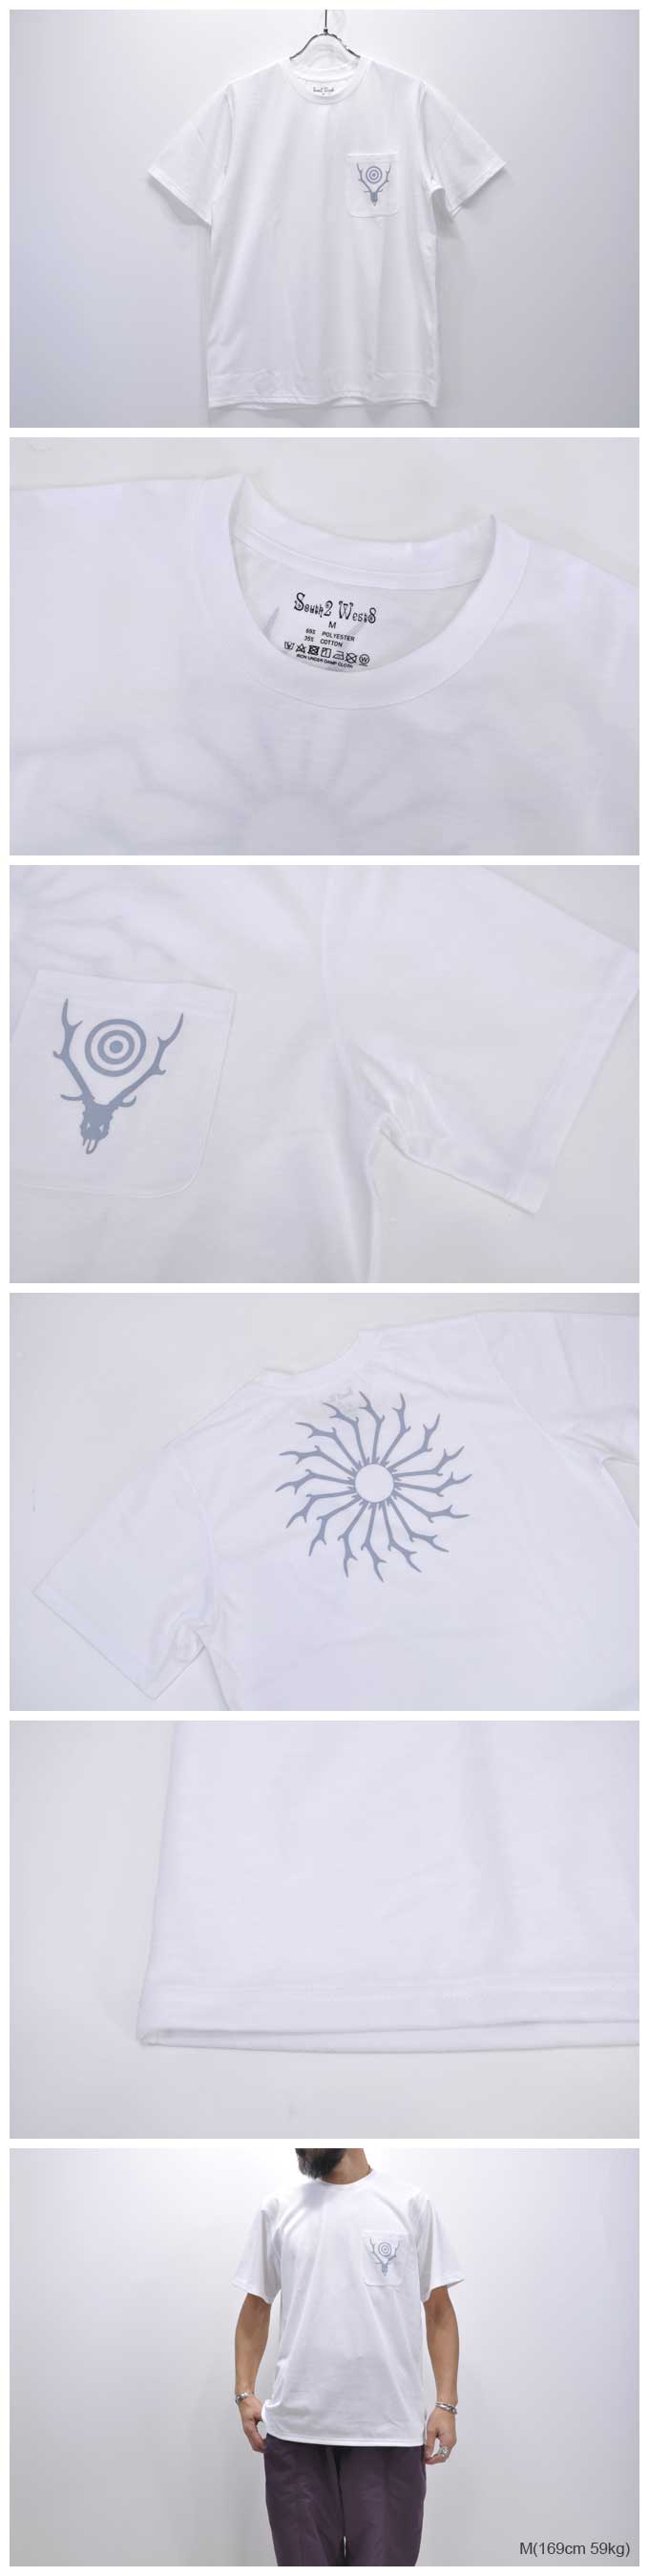 South2 West8 Round Pocket Tee(Circle Horn)